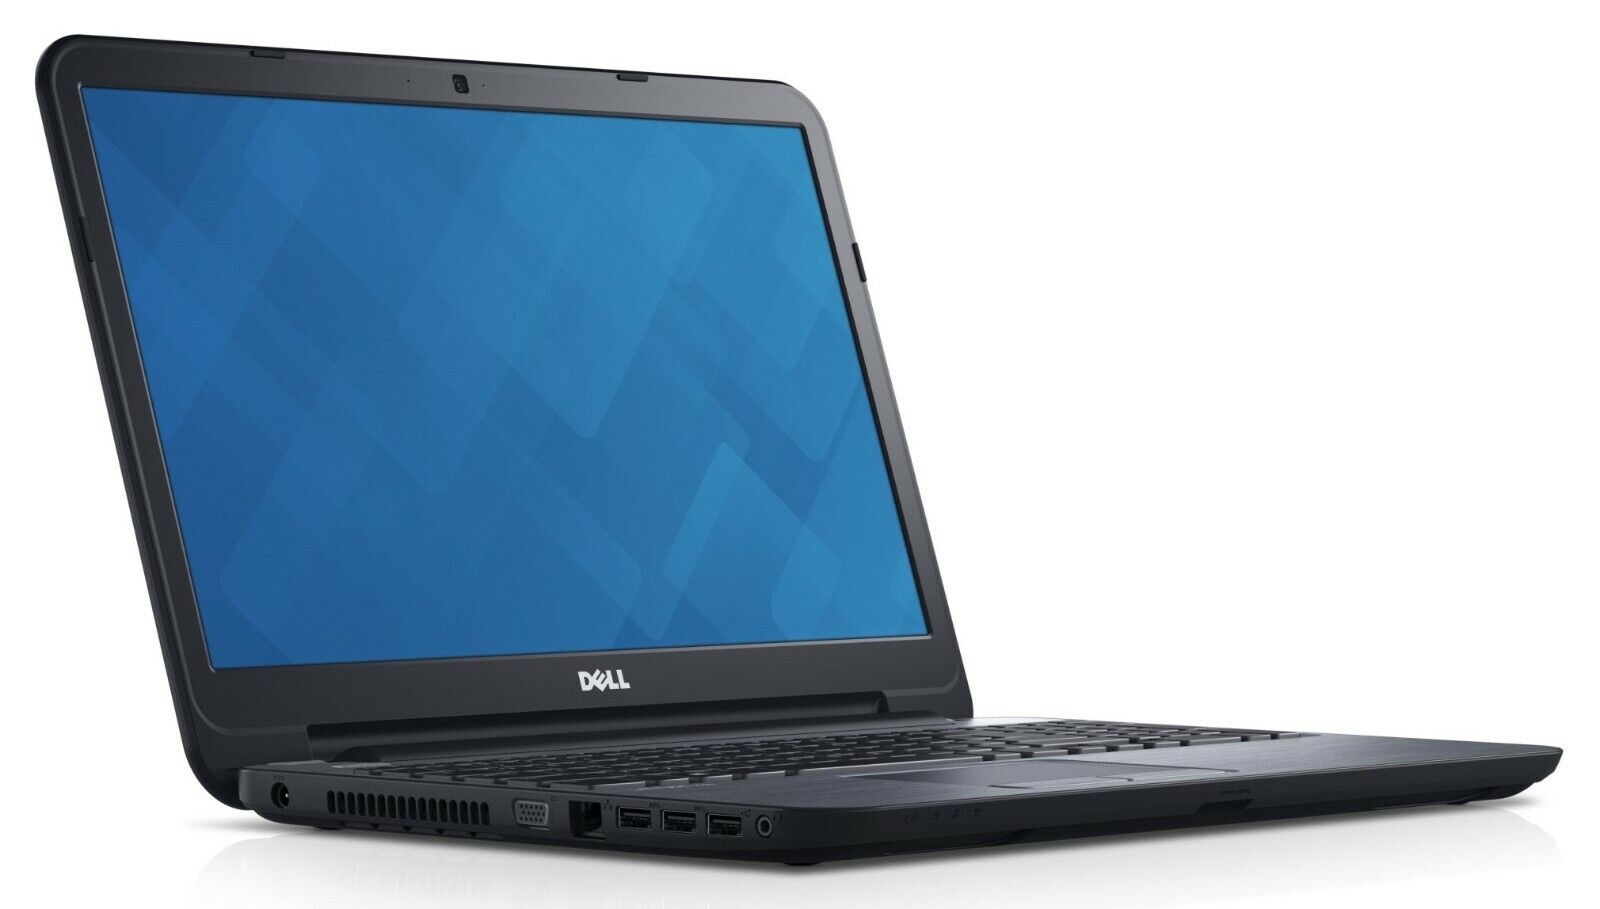 Dell Laptop Computer 3540 15.6